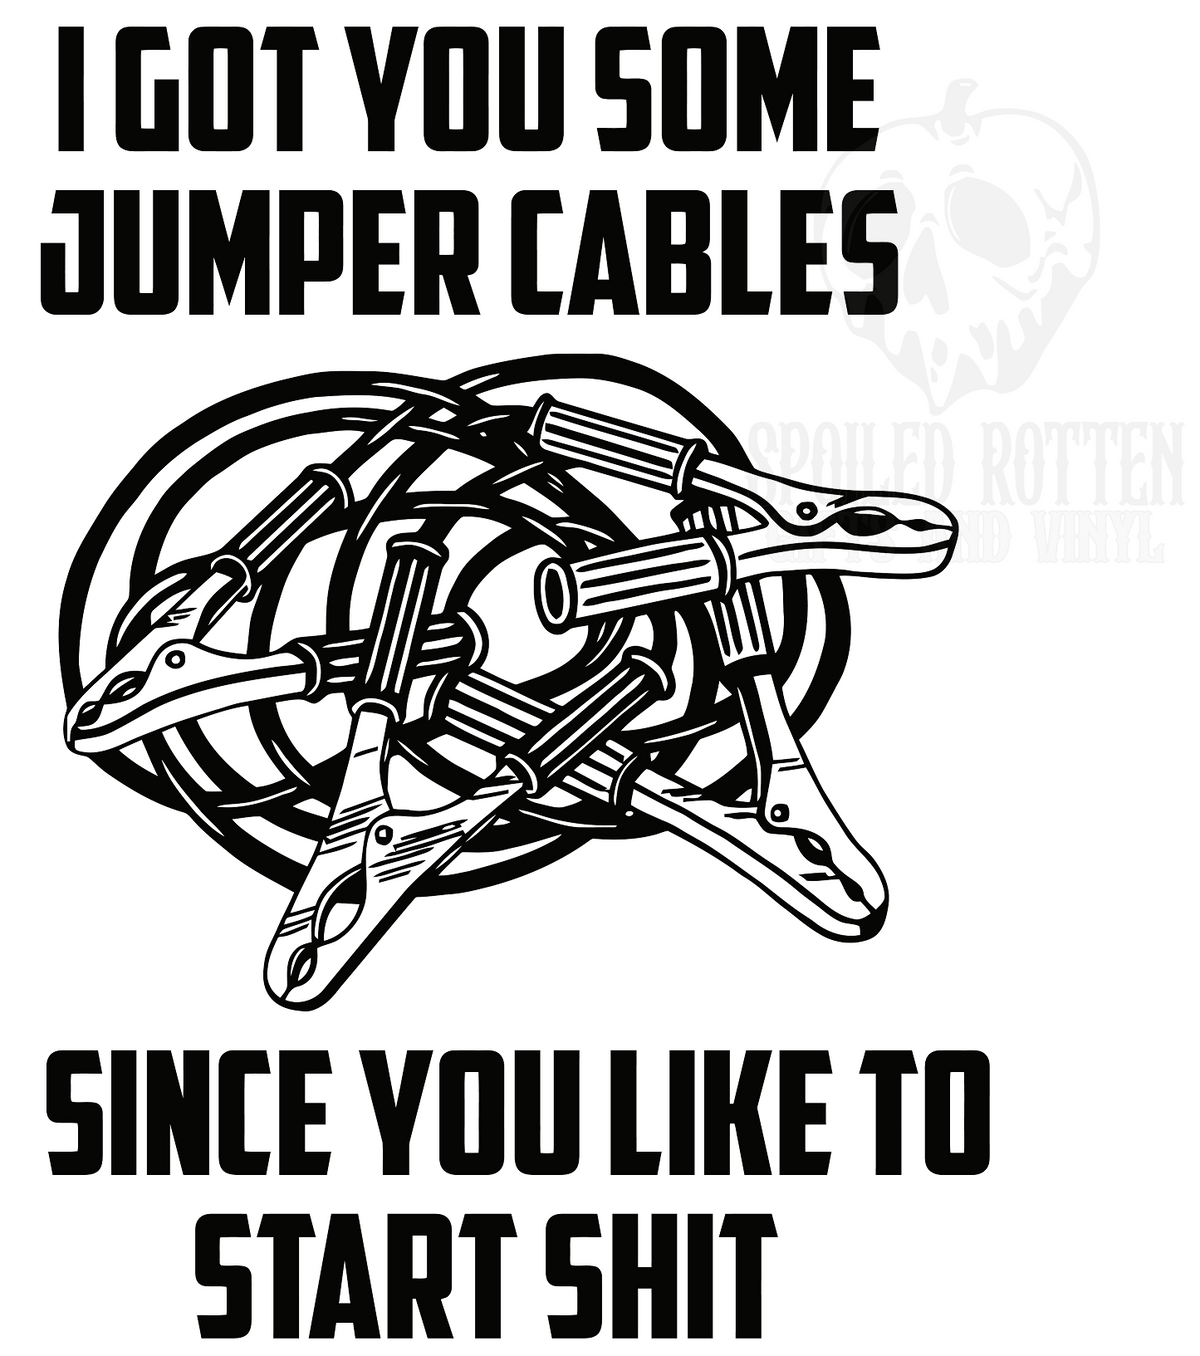 I Got You Some Jumper Cables vinyl decal